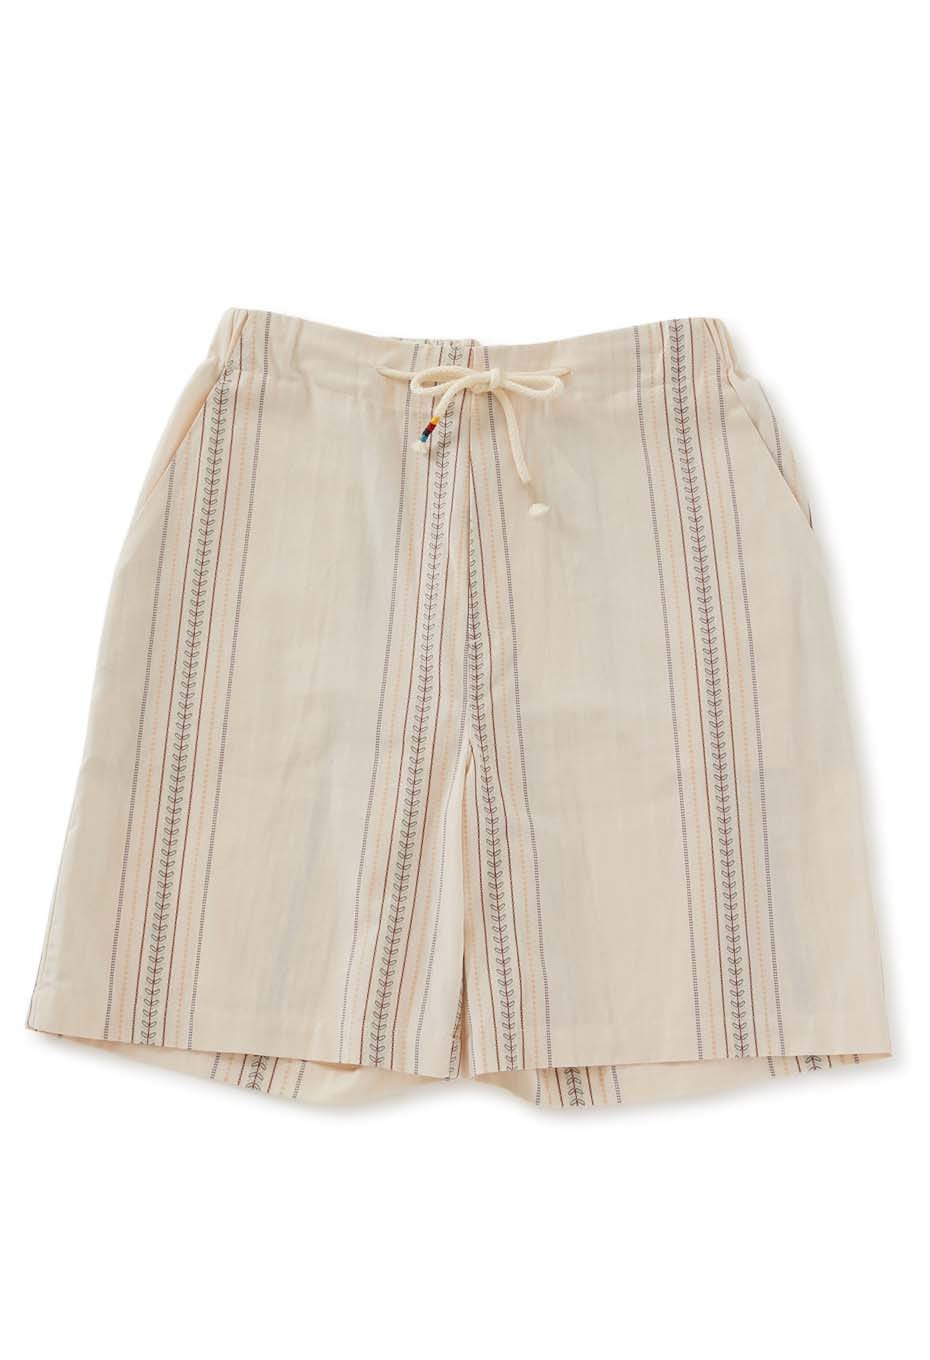 THE SILTED COMPANY /HARMONY Coffin shorts